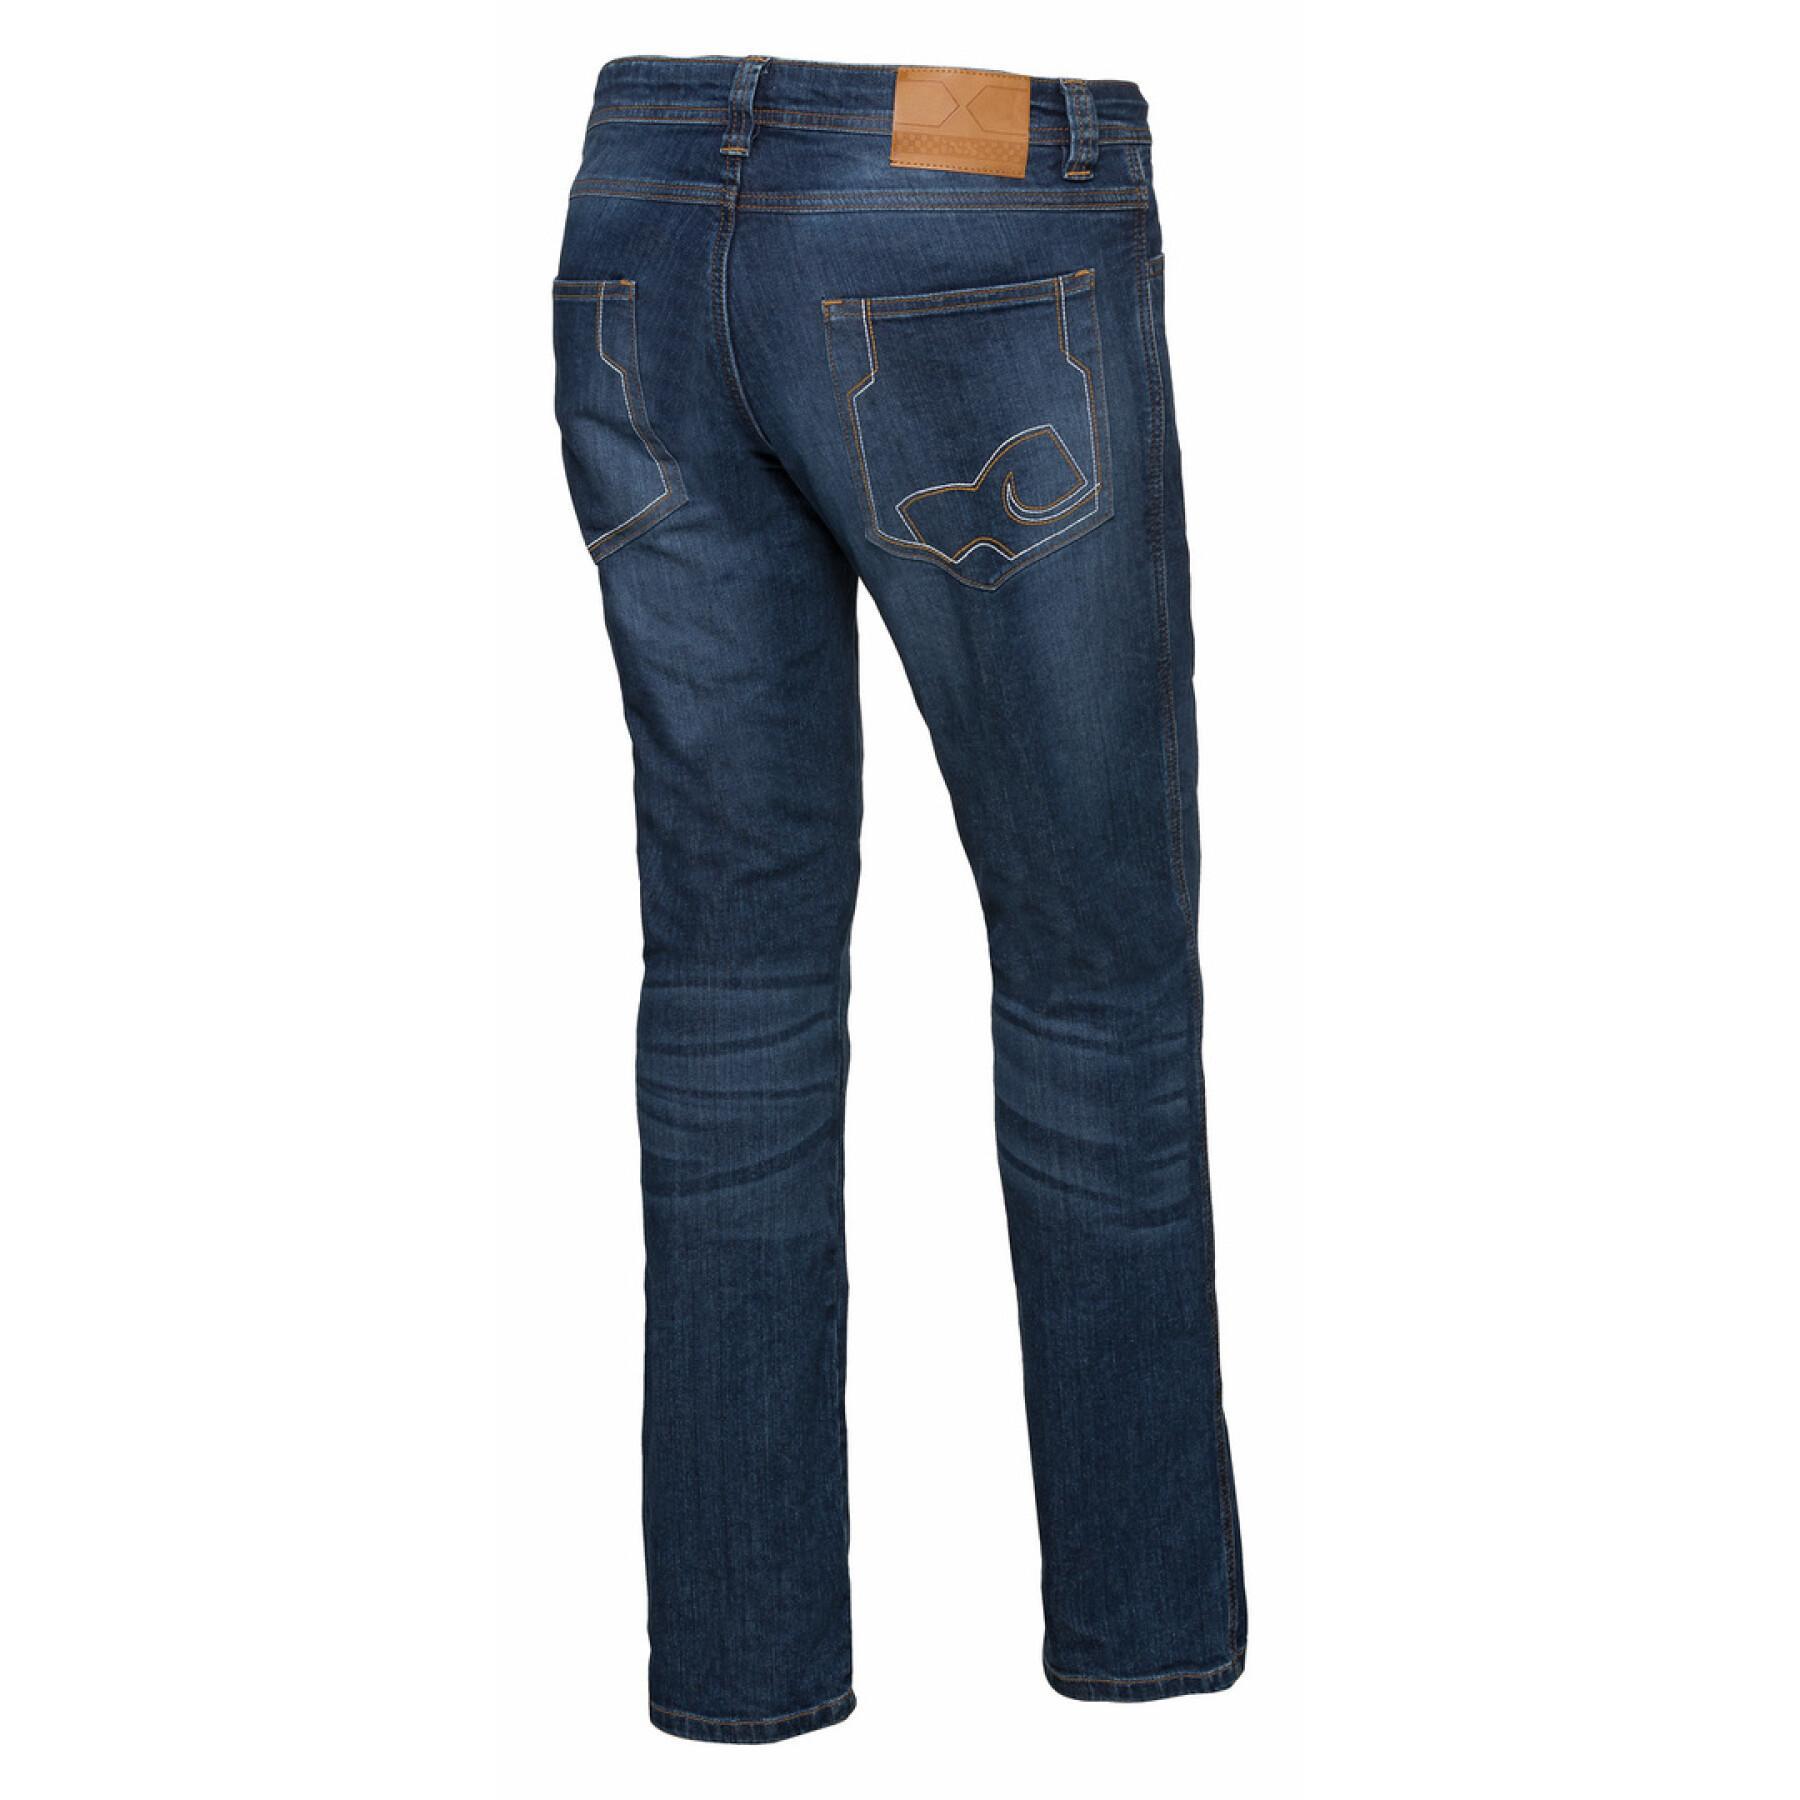 Classic motorcycle jeans IXS ar clarkson